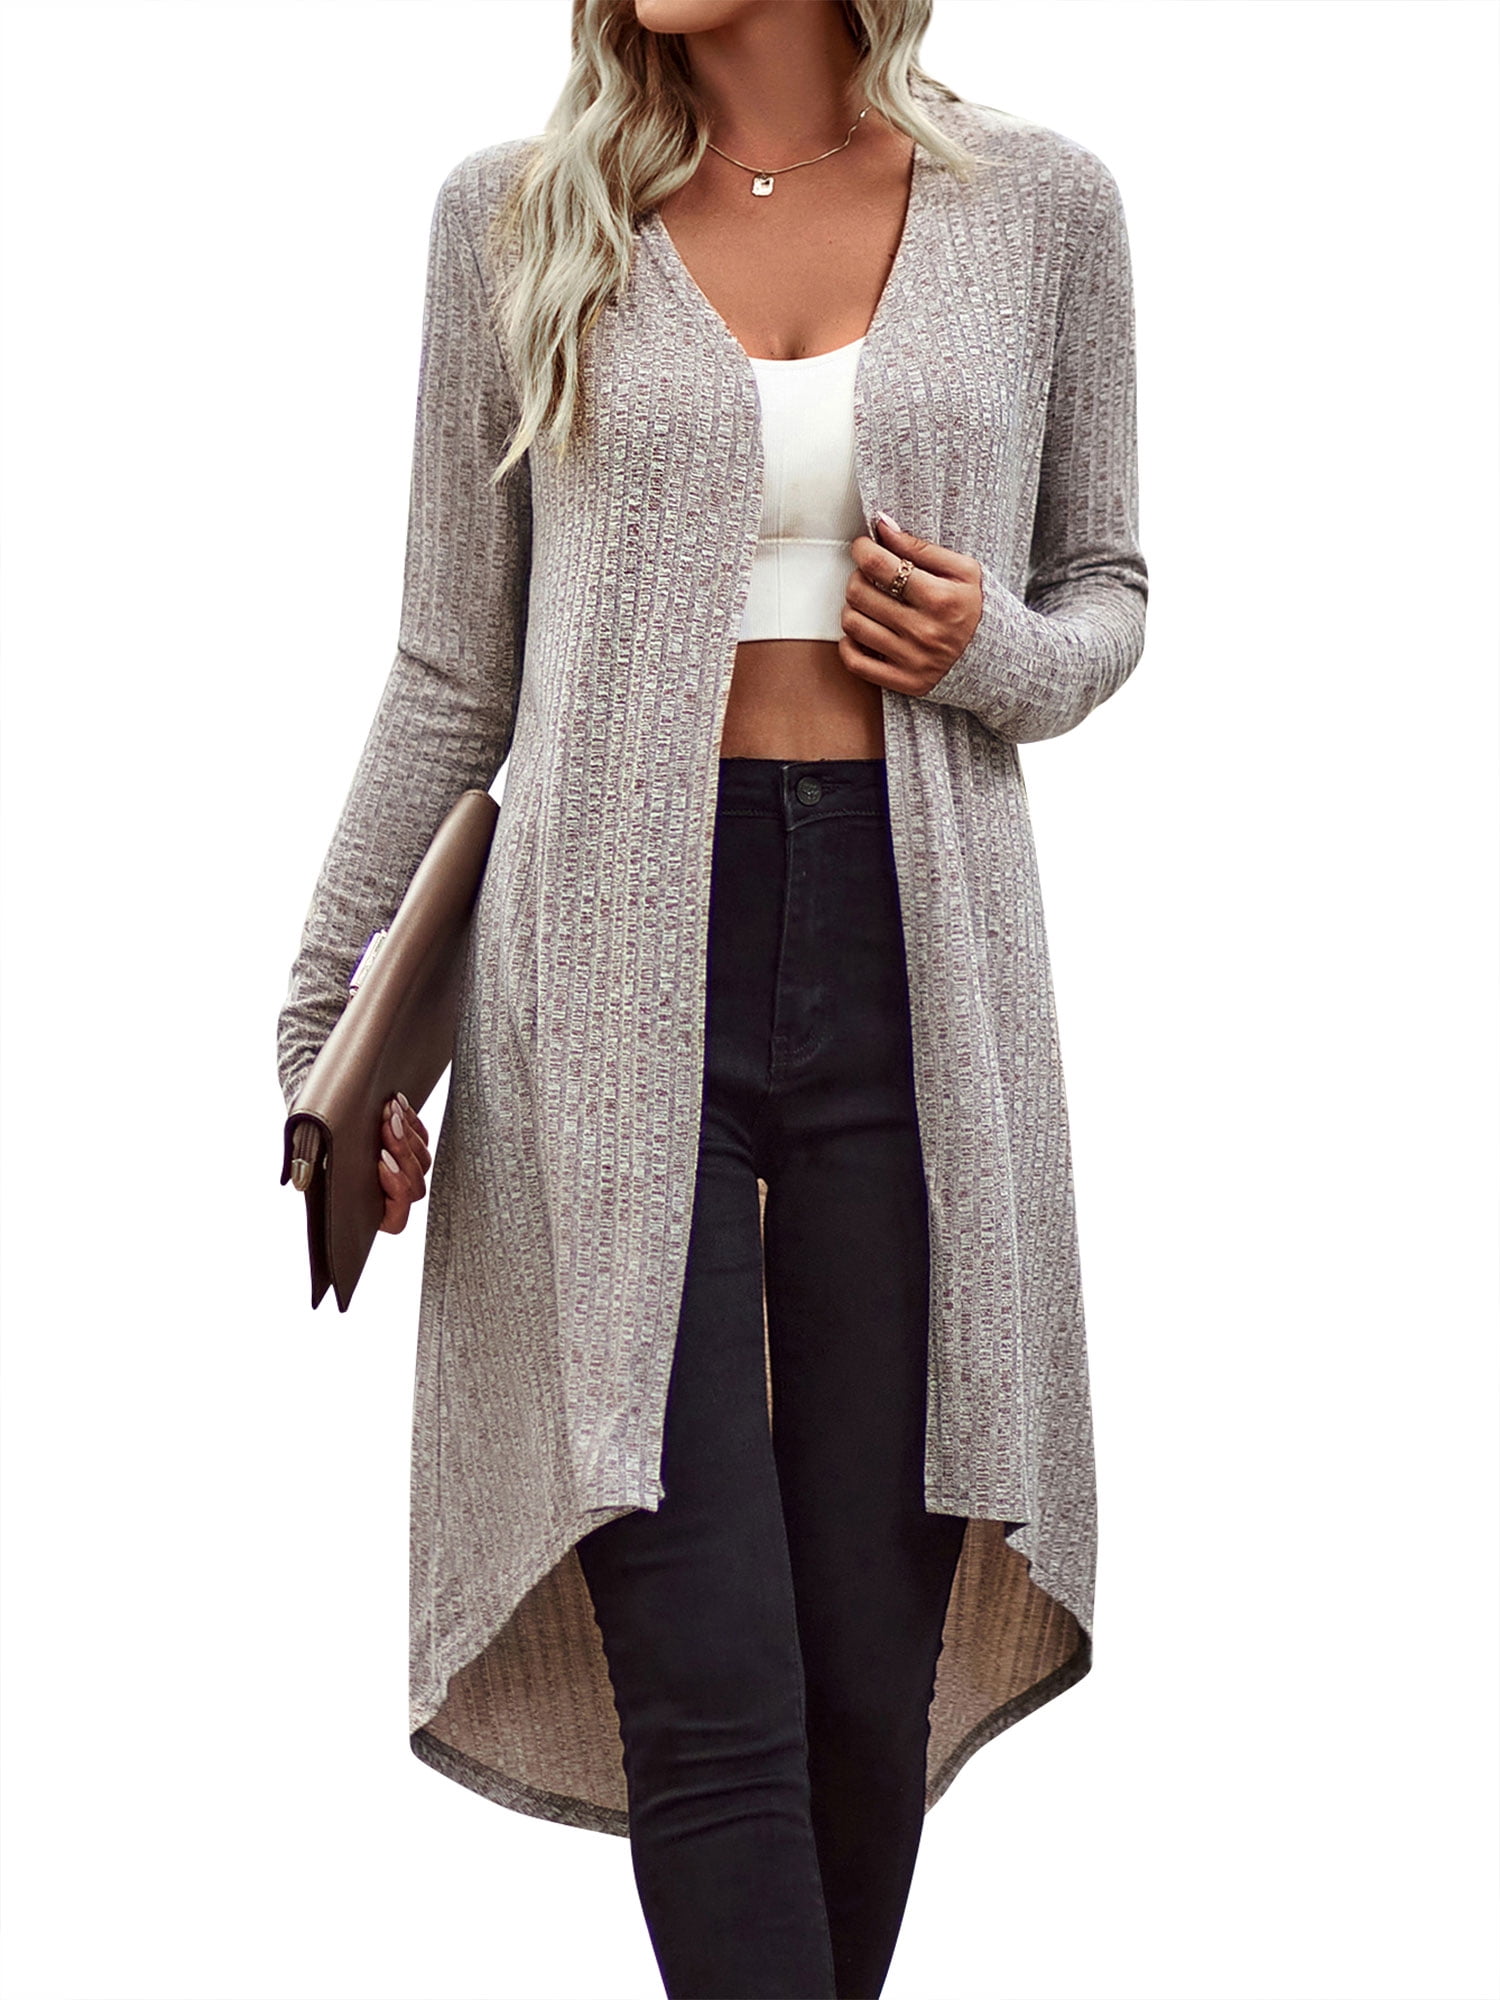 ZXZY Women Open Front Knitted Long Sleeve Solid Color Scoop Hem Cardigan